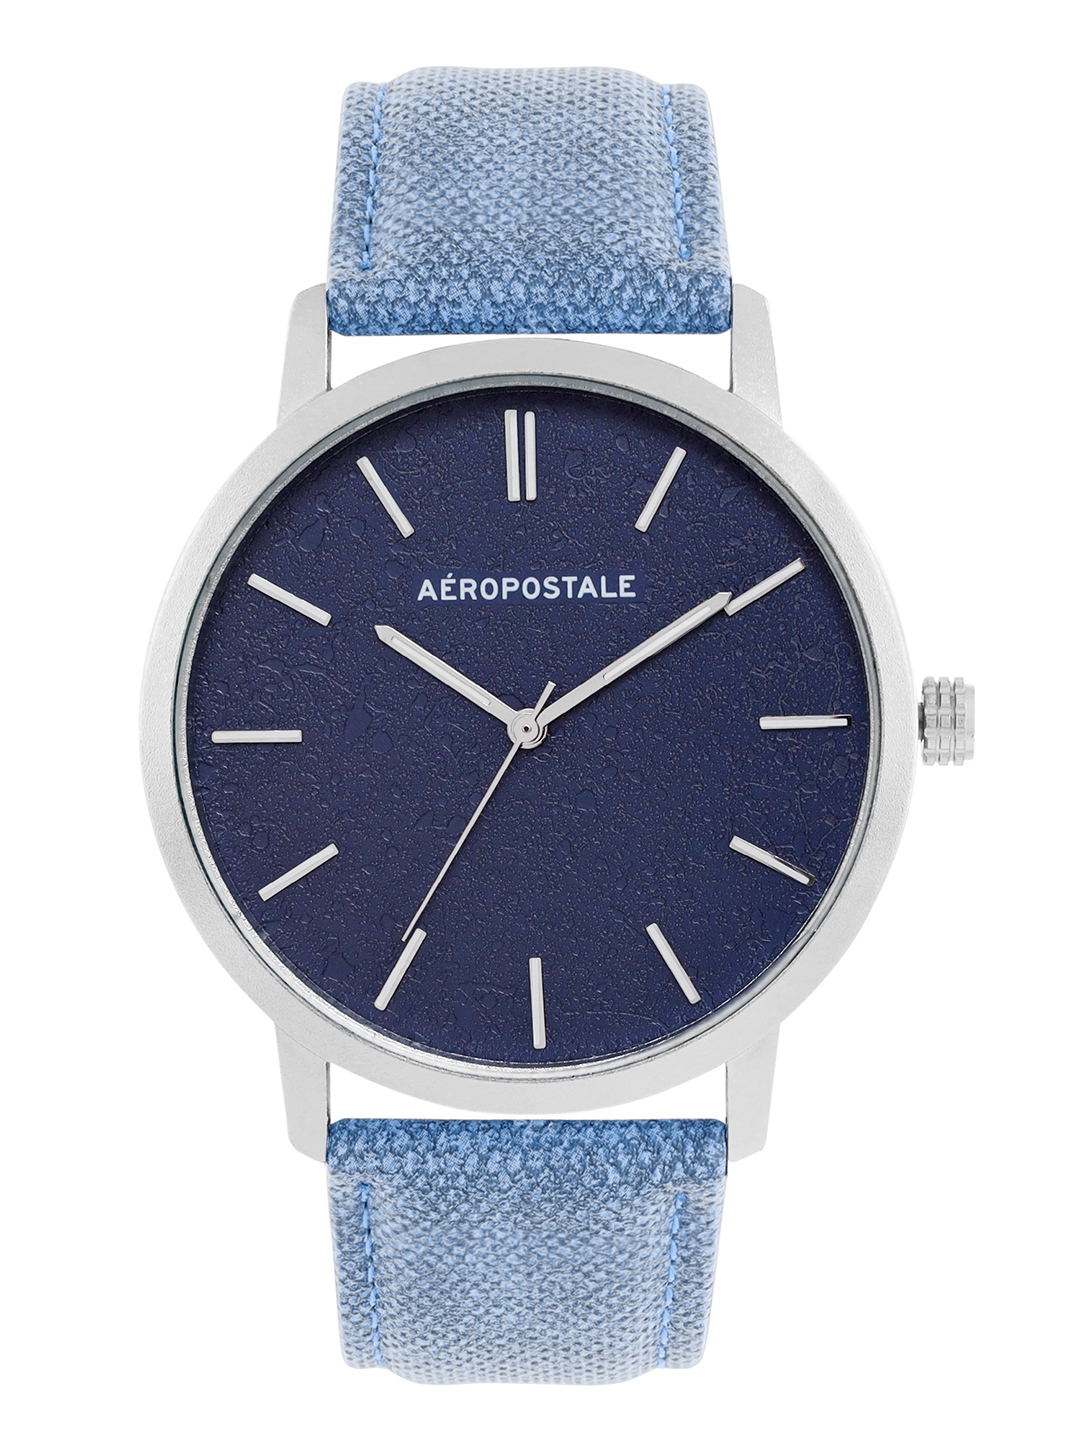 Aeropostale | Aeropostale "AERO_AW_A41_BLU" Classic Men’s Analog Quartz Wrist Watch, Metal Alloy Silver case, Classic Navy Blue Dial with contrasting silver hand,  Blue wrist Band Water resistant 3.0 ATM